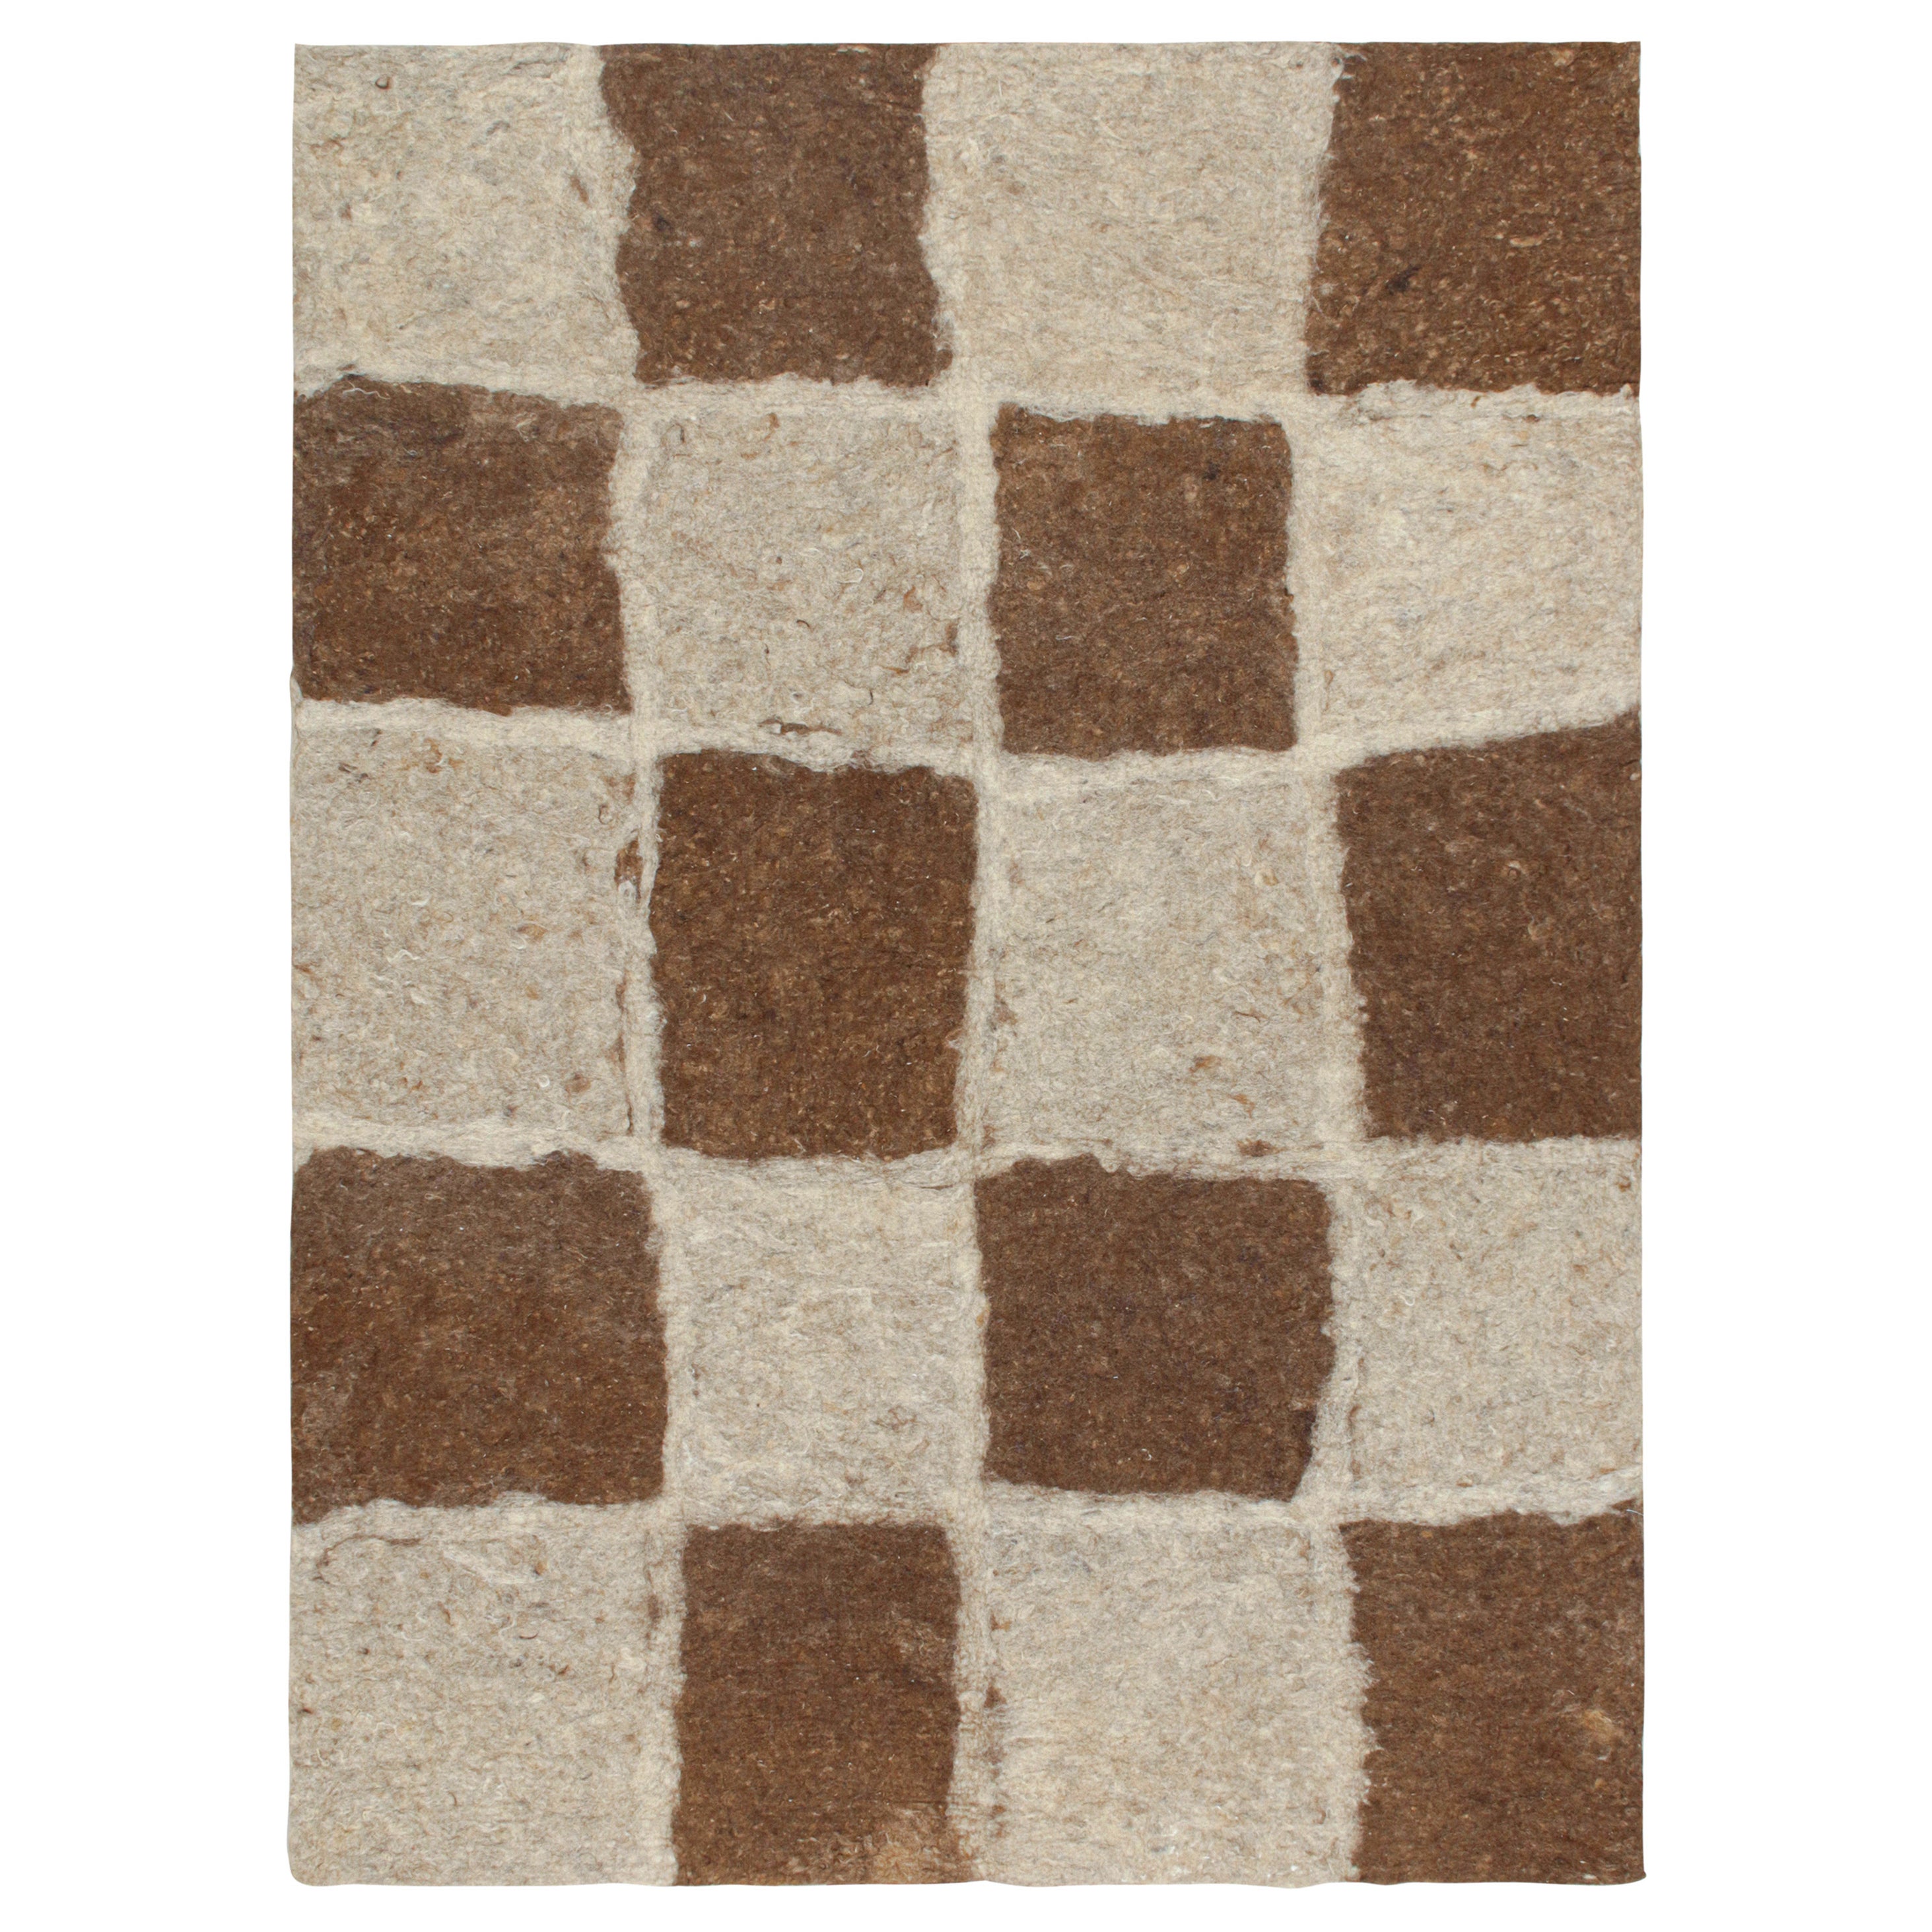 Rug & Kilim’s Contemporary Felted Persian Rug in Beige-Brown Geometric Pattern For Sale